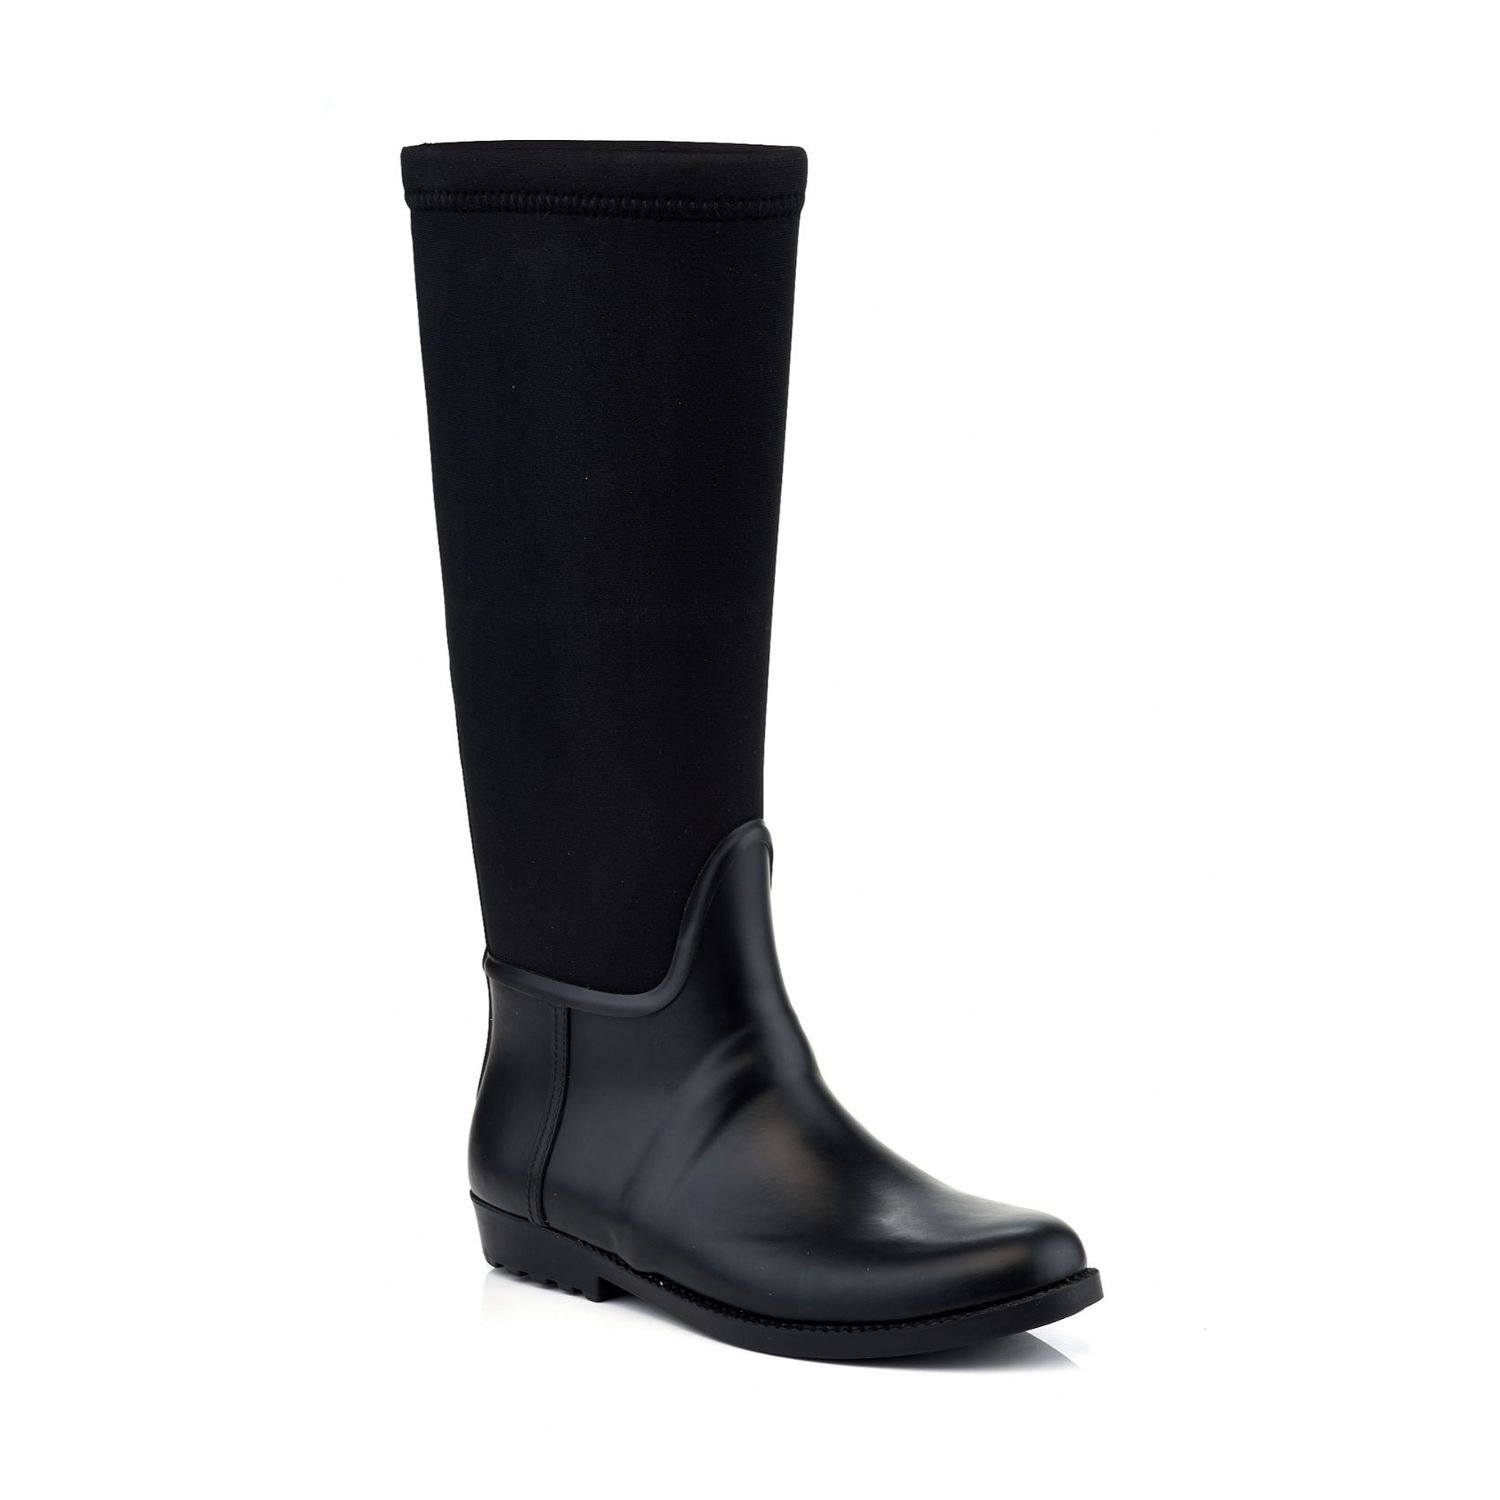 Image for Henry Ferrera French-200 Women's Rain Boots at Kohl's.